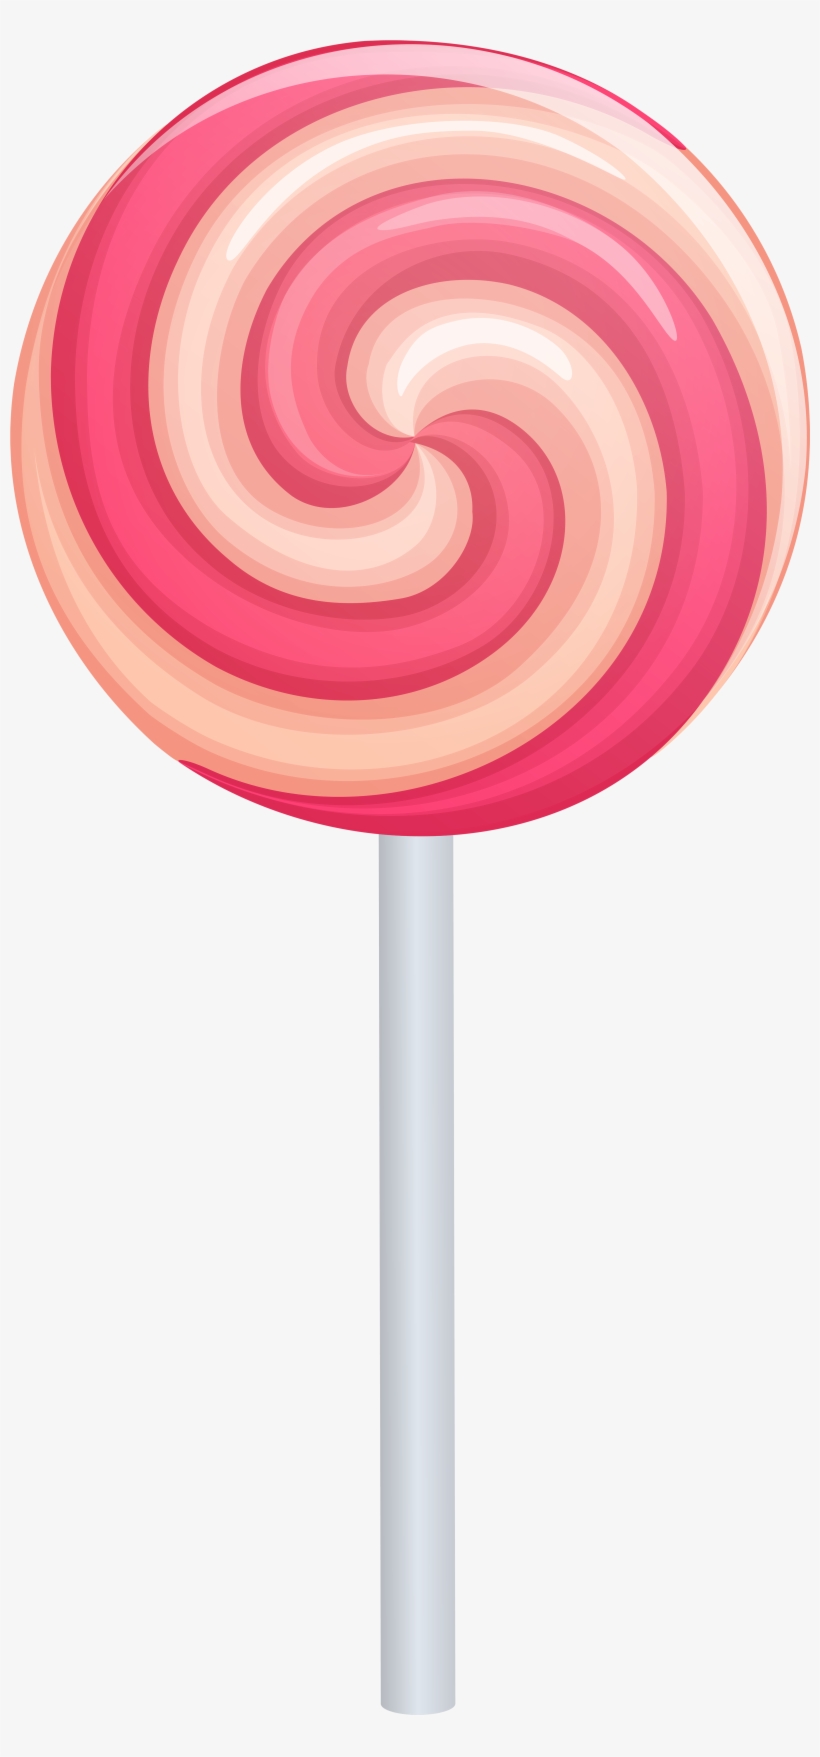 Pink Swirl Png Clip Art Image Gallery - Free Transparent PNG Download ...